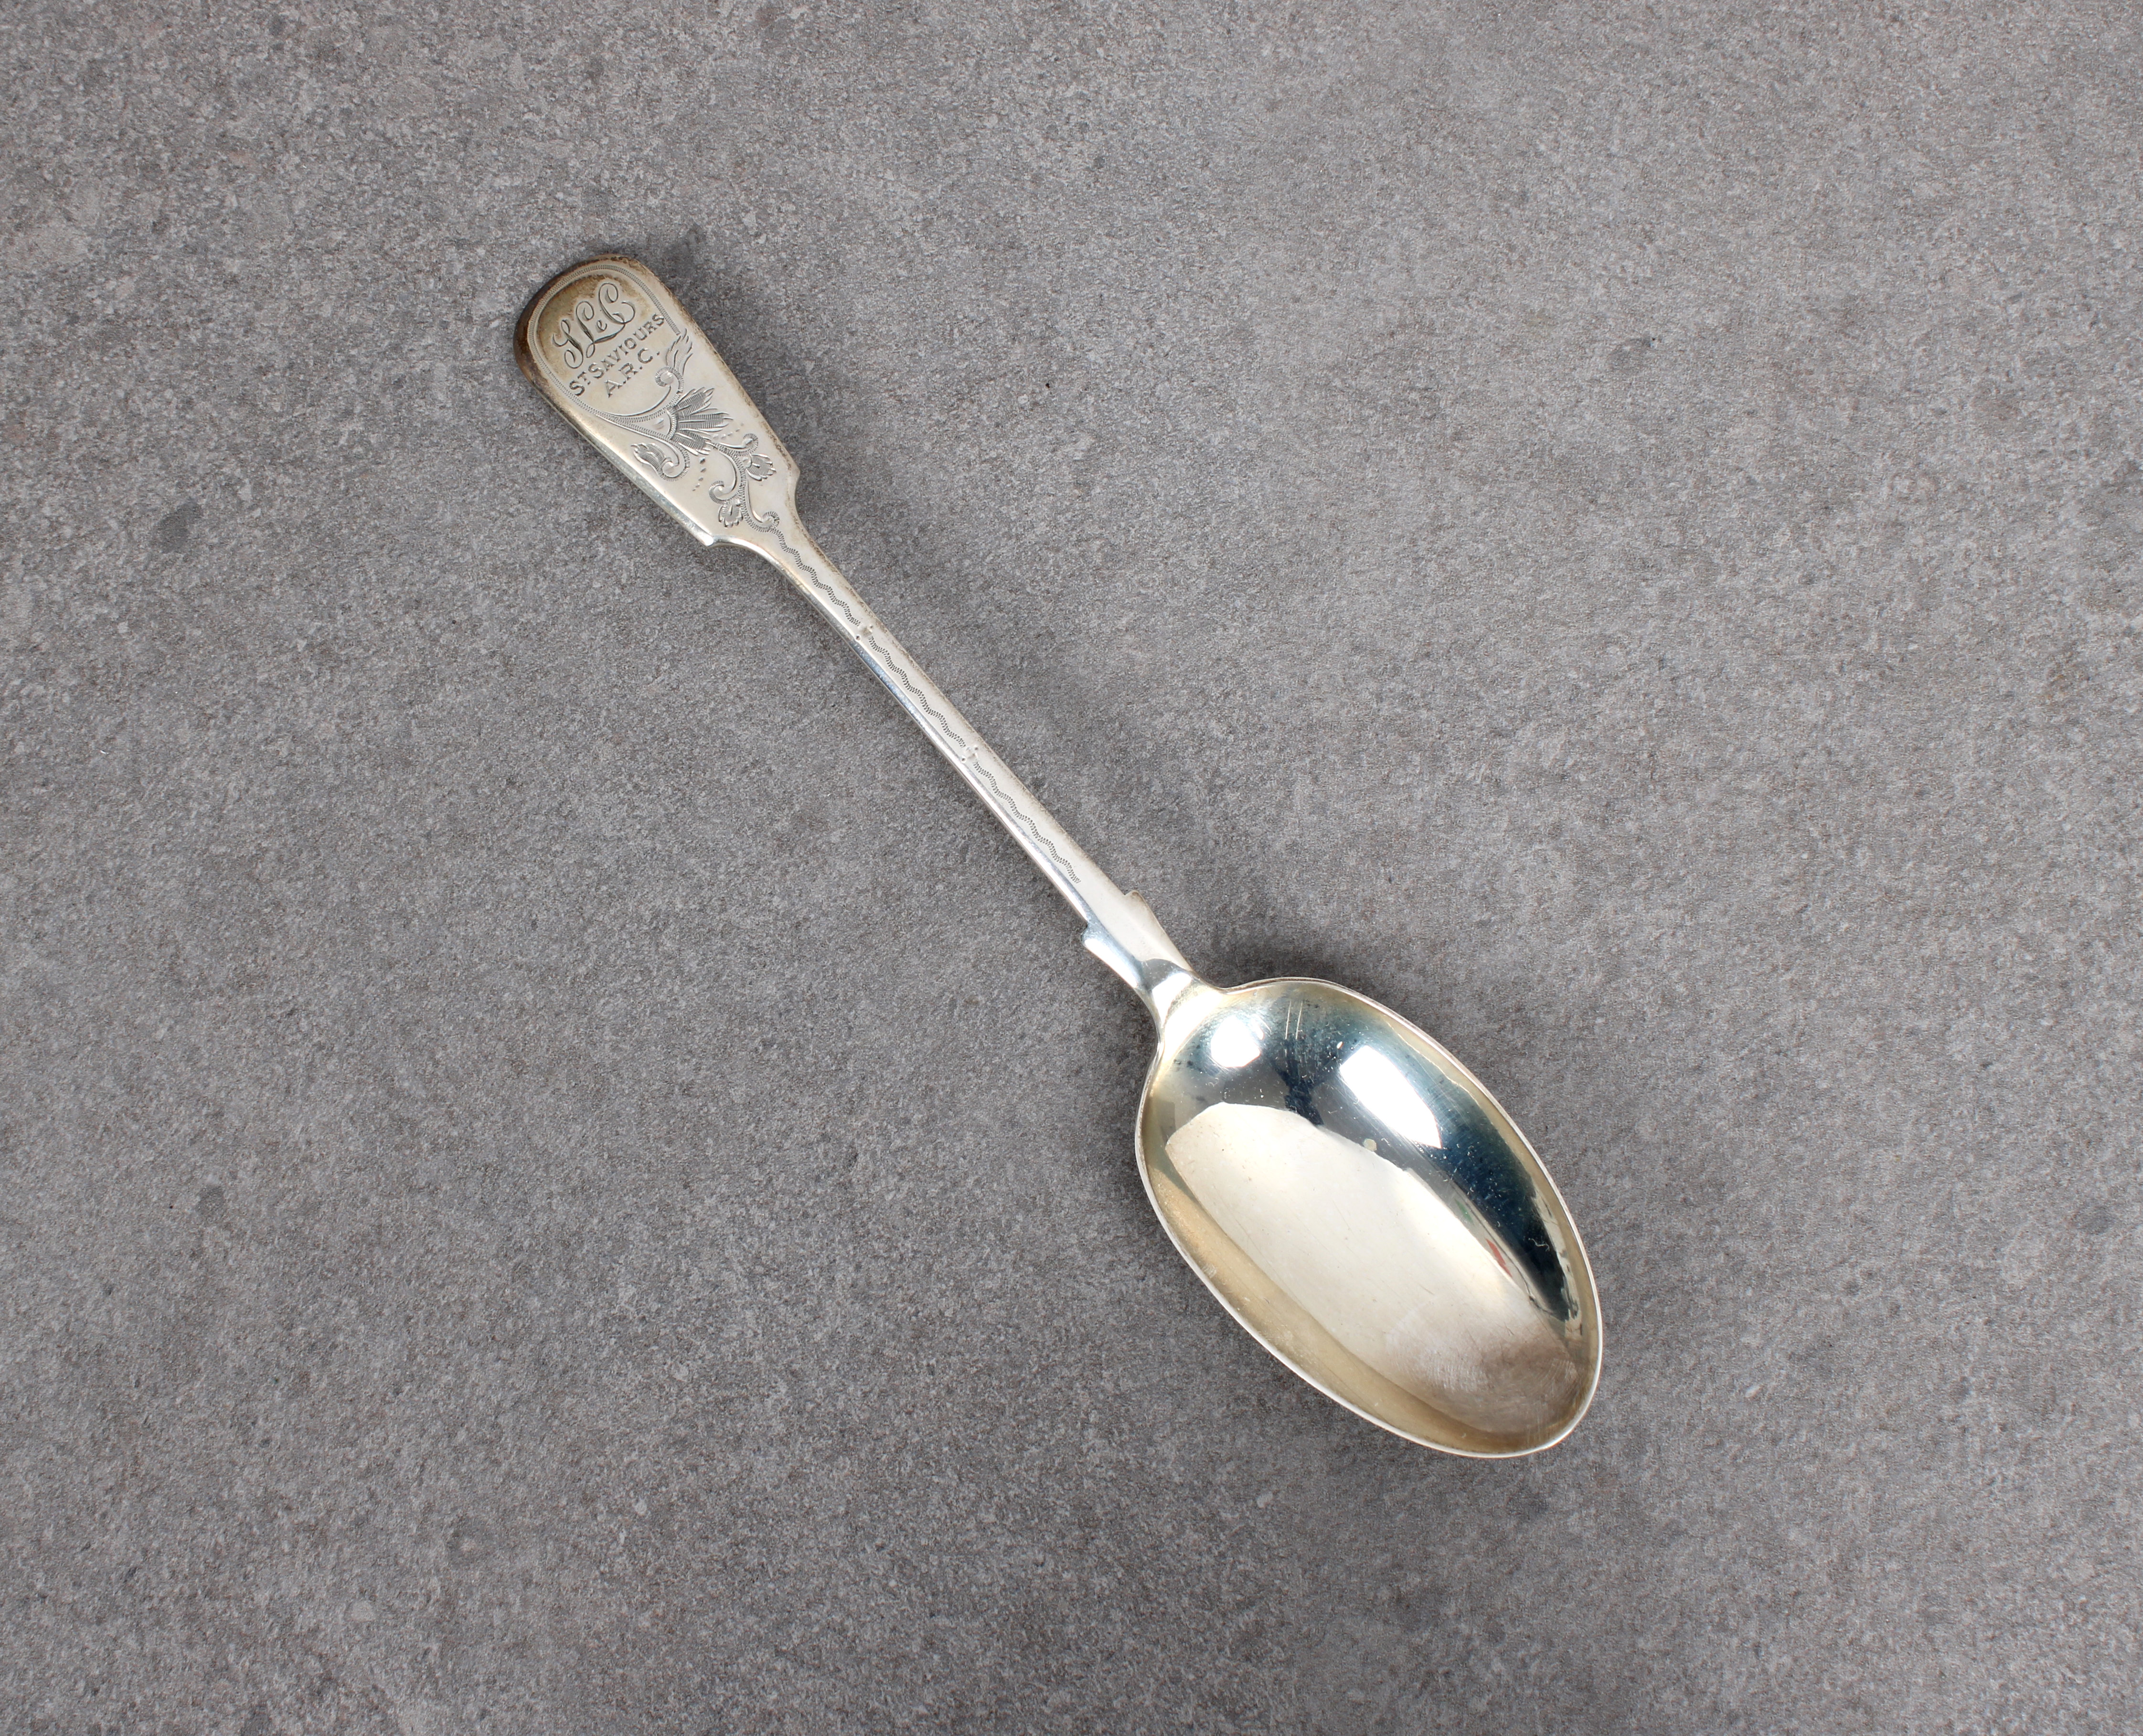 Guernsey shooting interest - A fiddle pattern shooting prize table spoon